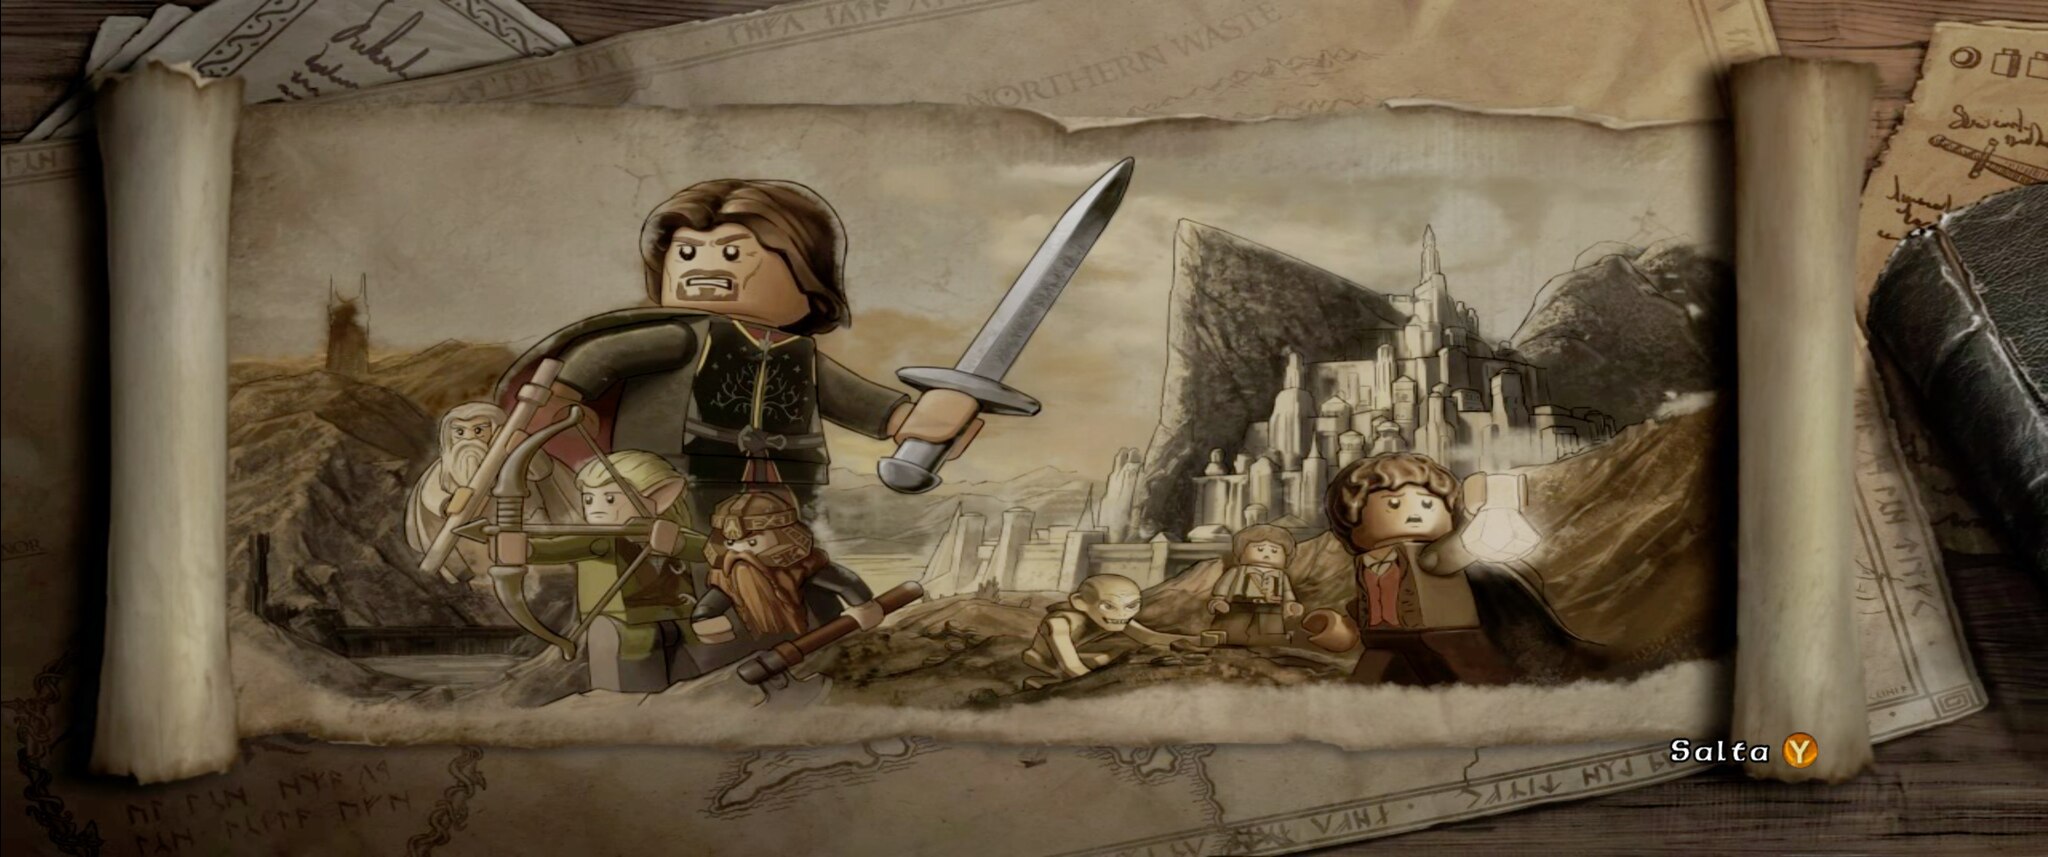 lego lord of the rings vita codes